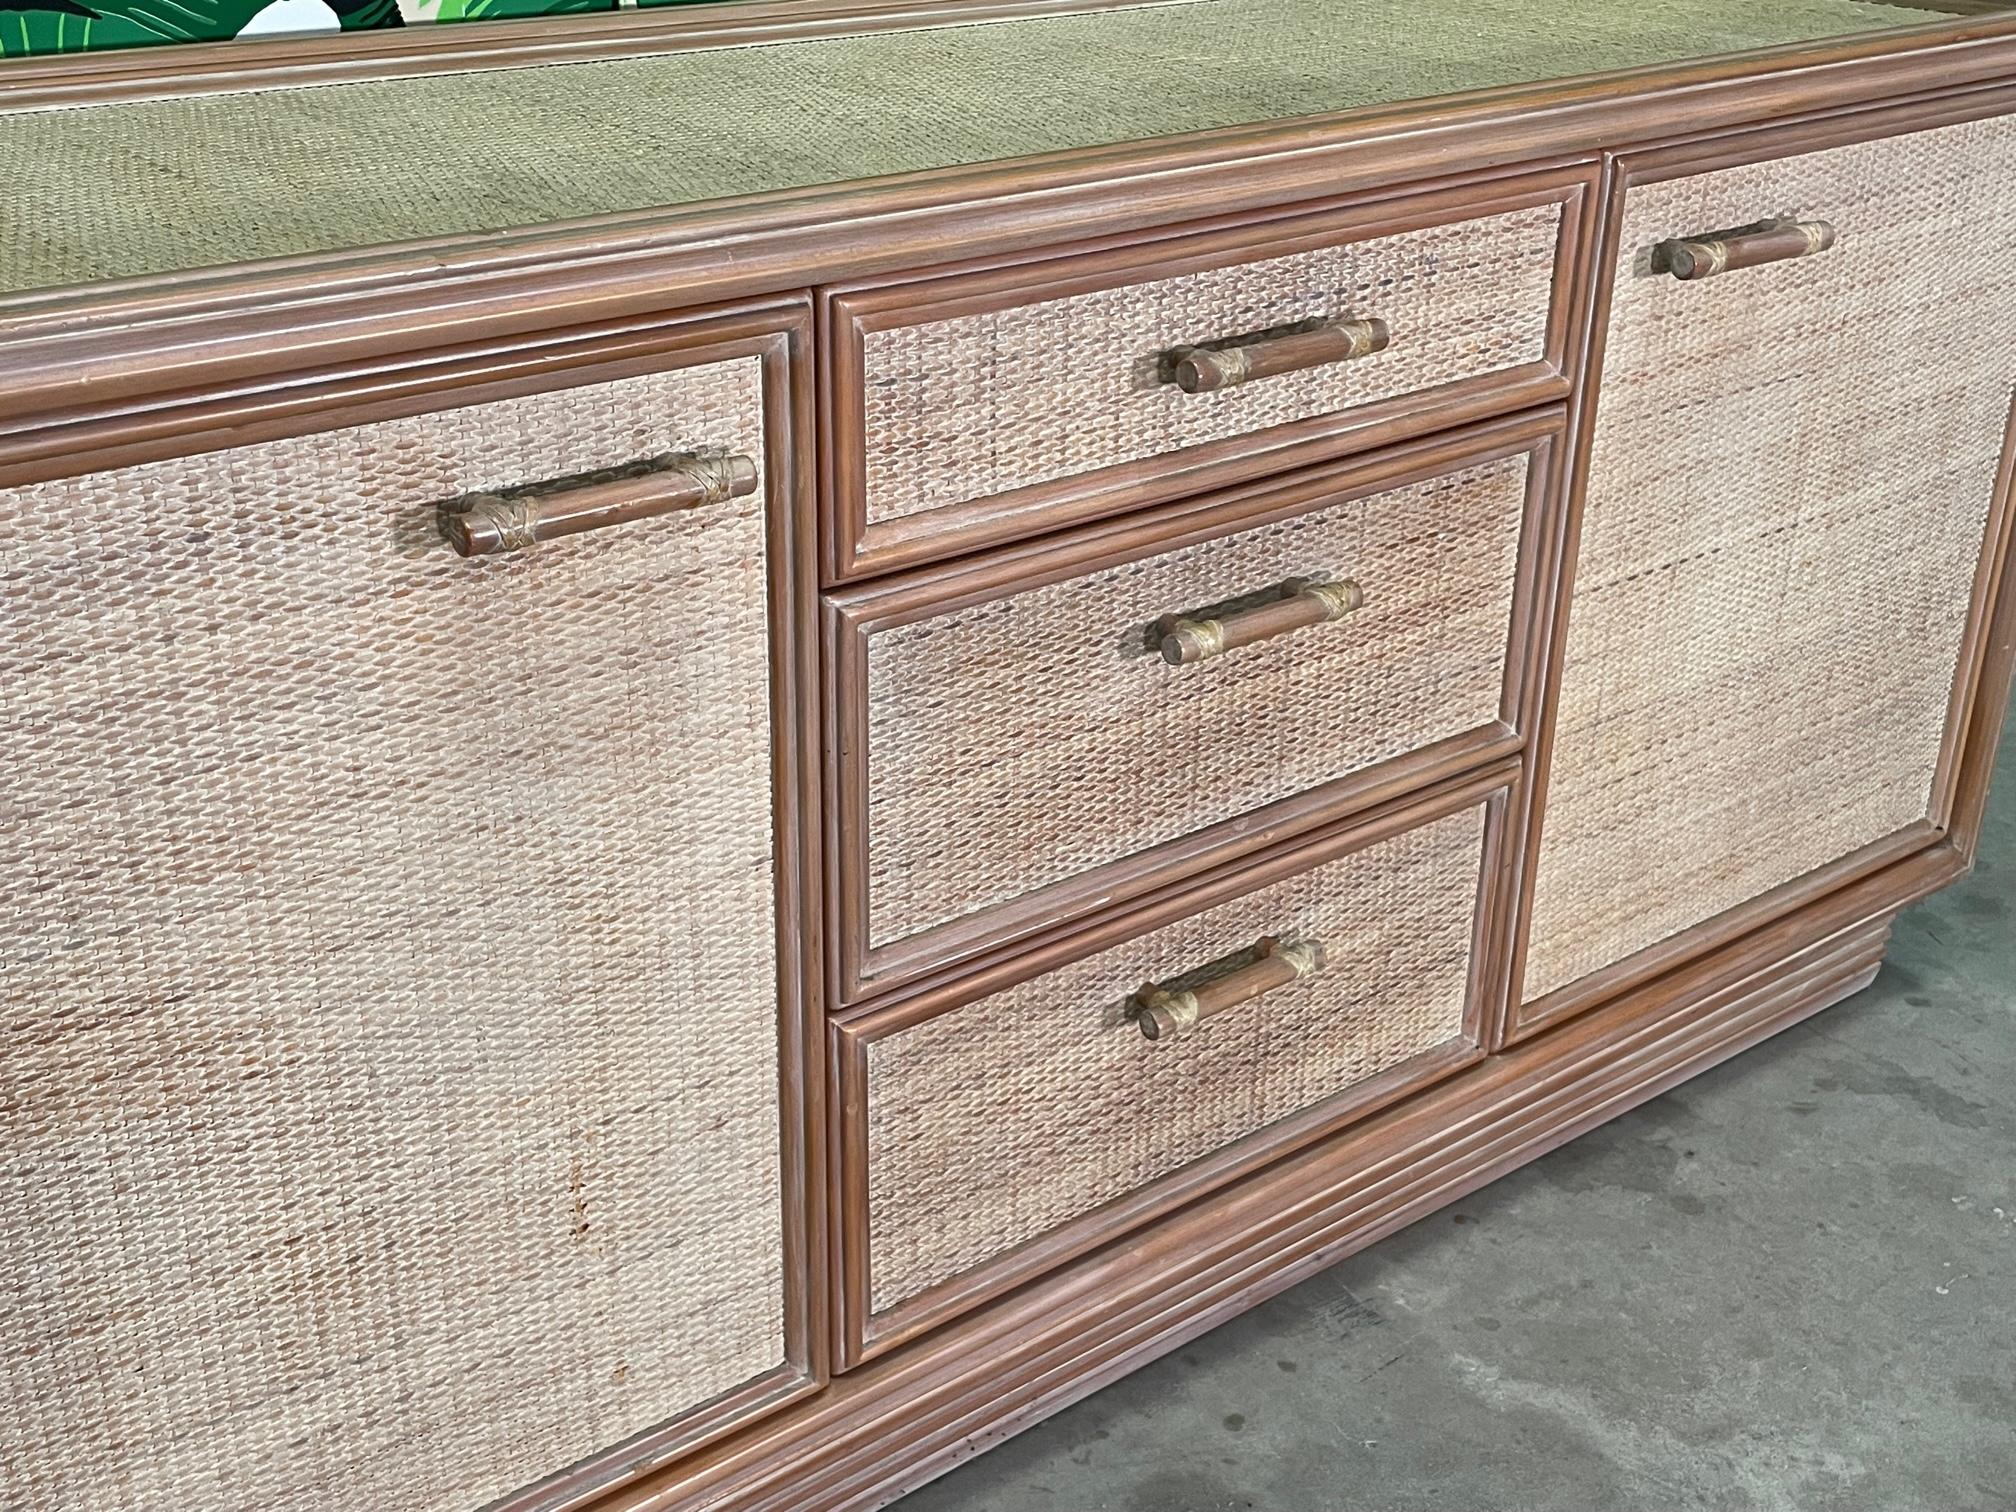 Rattan and Wicker Sideboard or Buffet In Good Condition For Sale In Jacksonville, FL